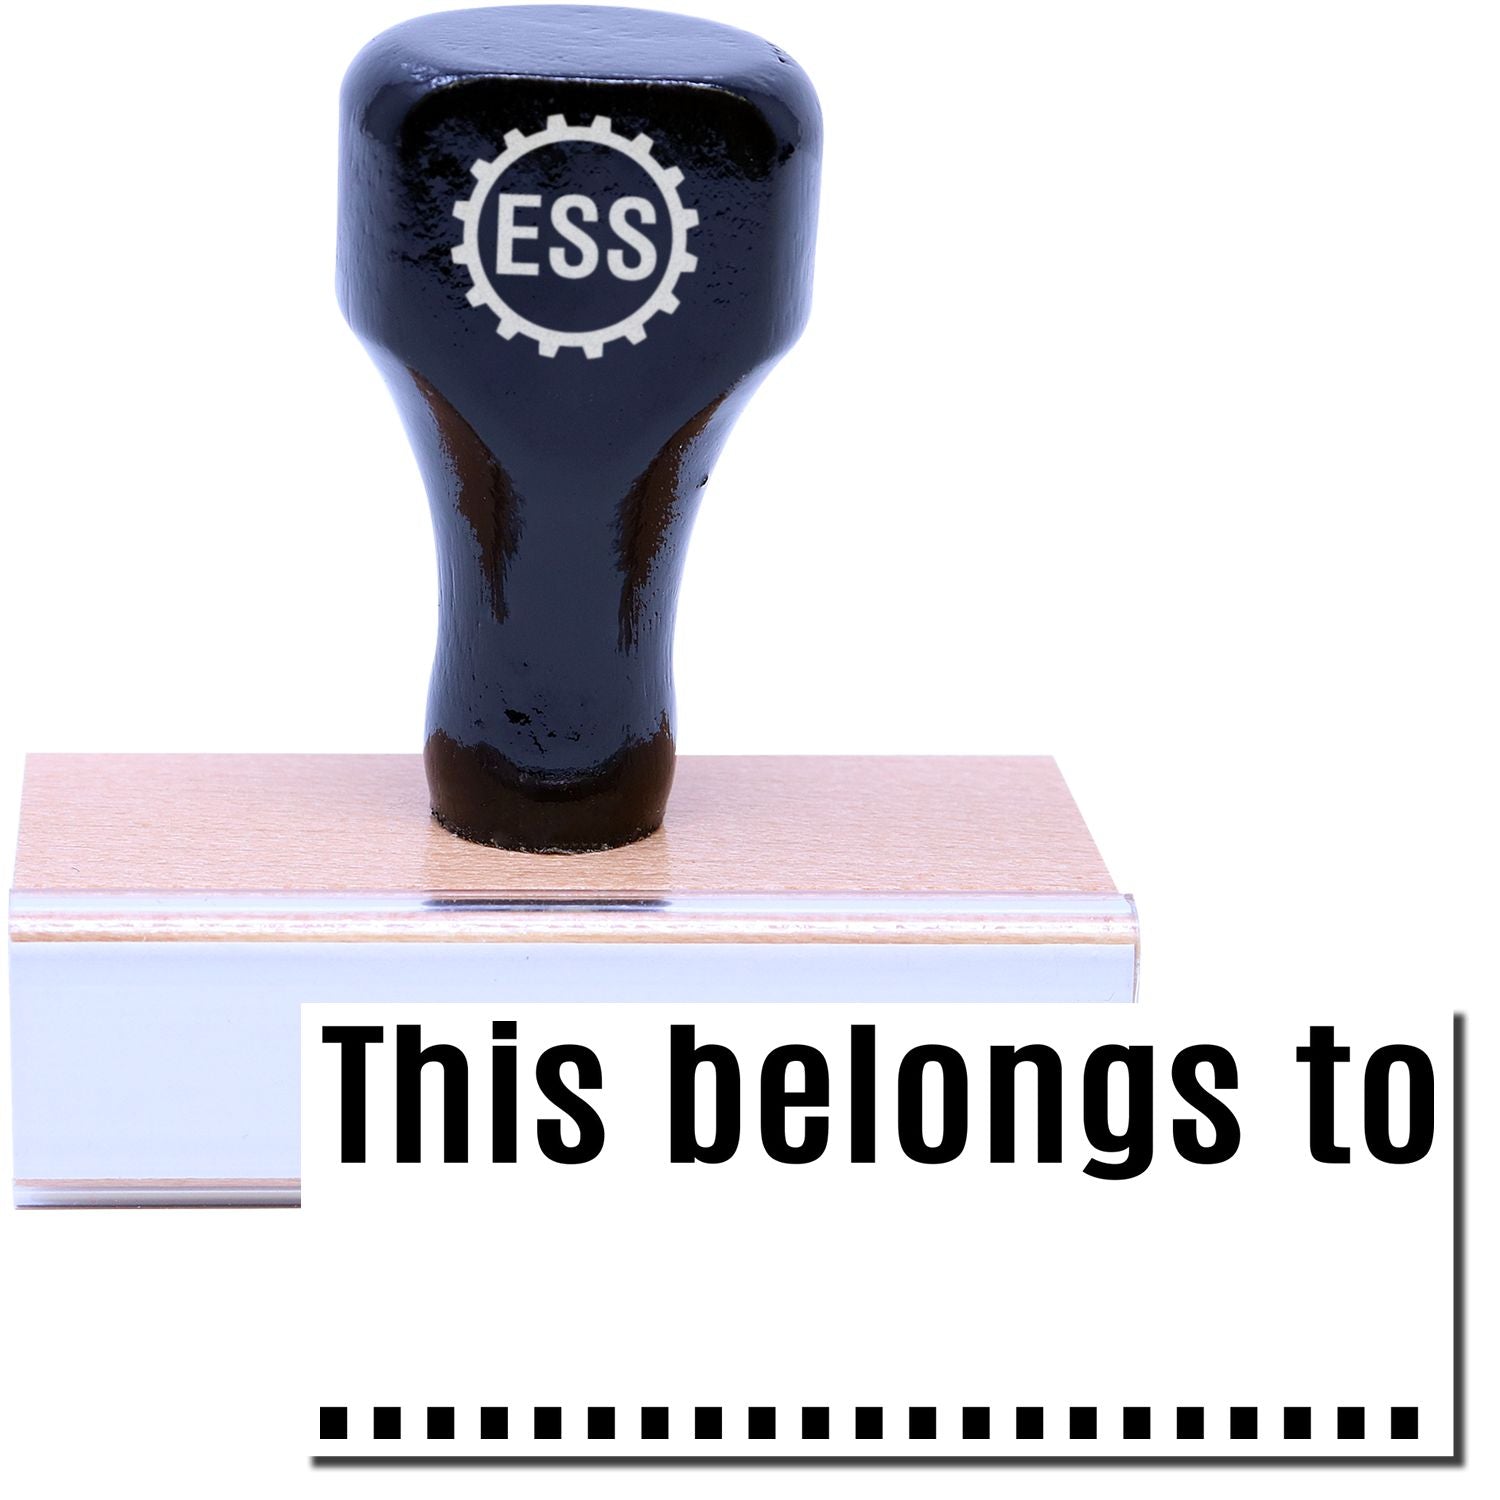 A stock office rubber stamp with a stamped image showing how the text "This belongs to" in a large font with a dotted line underneath the text is displayed after stamping.